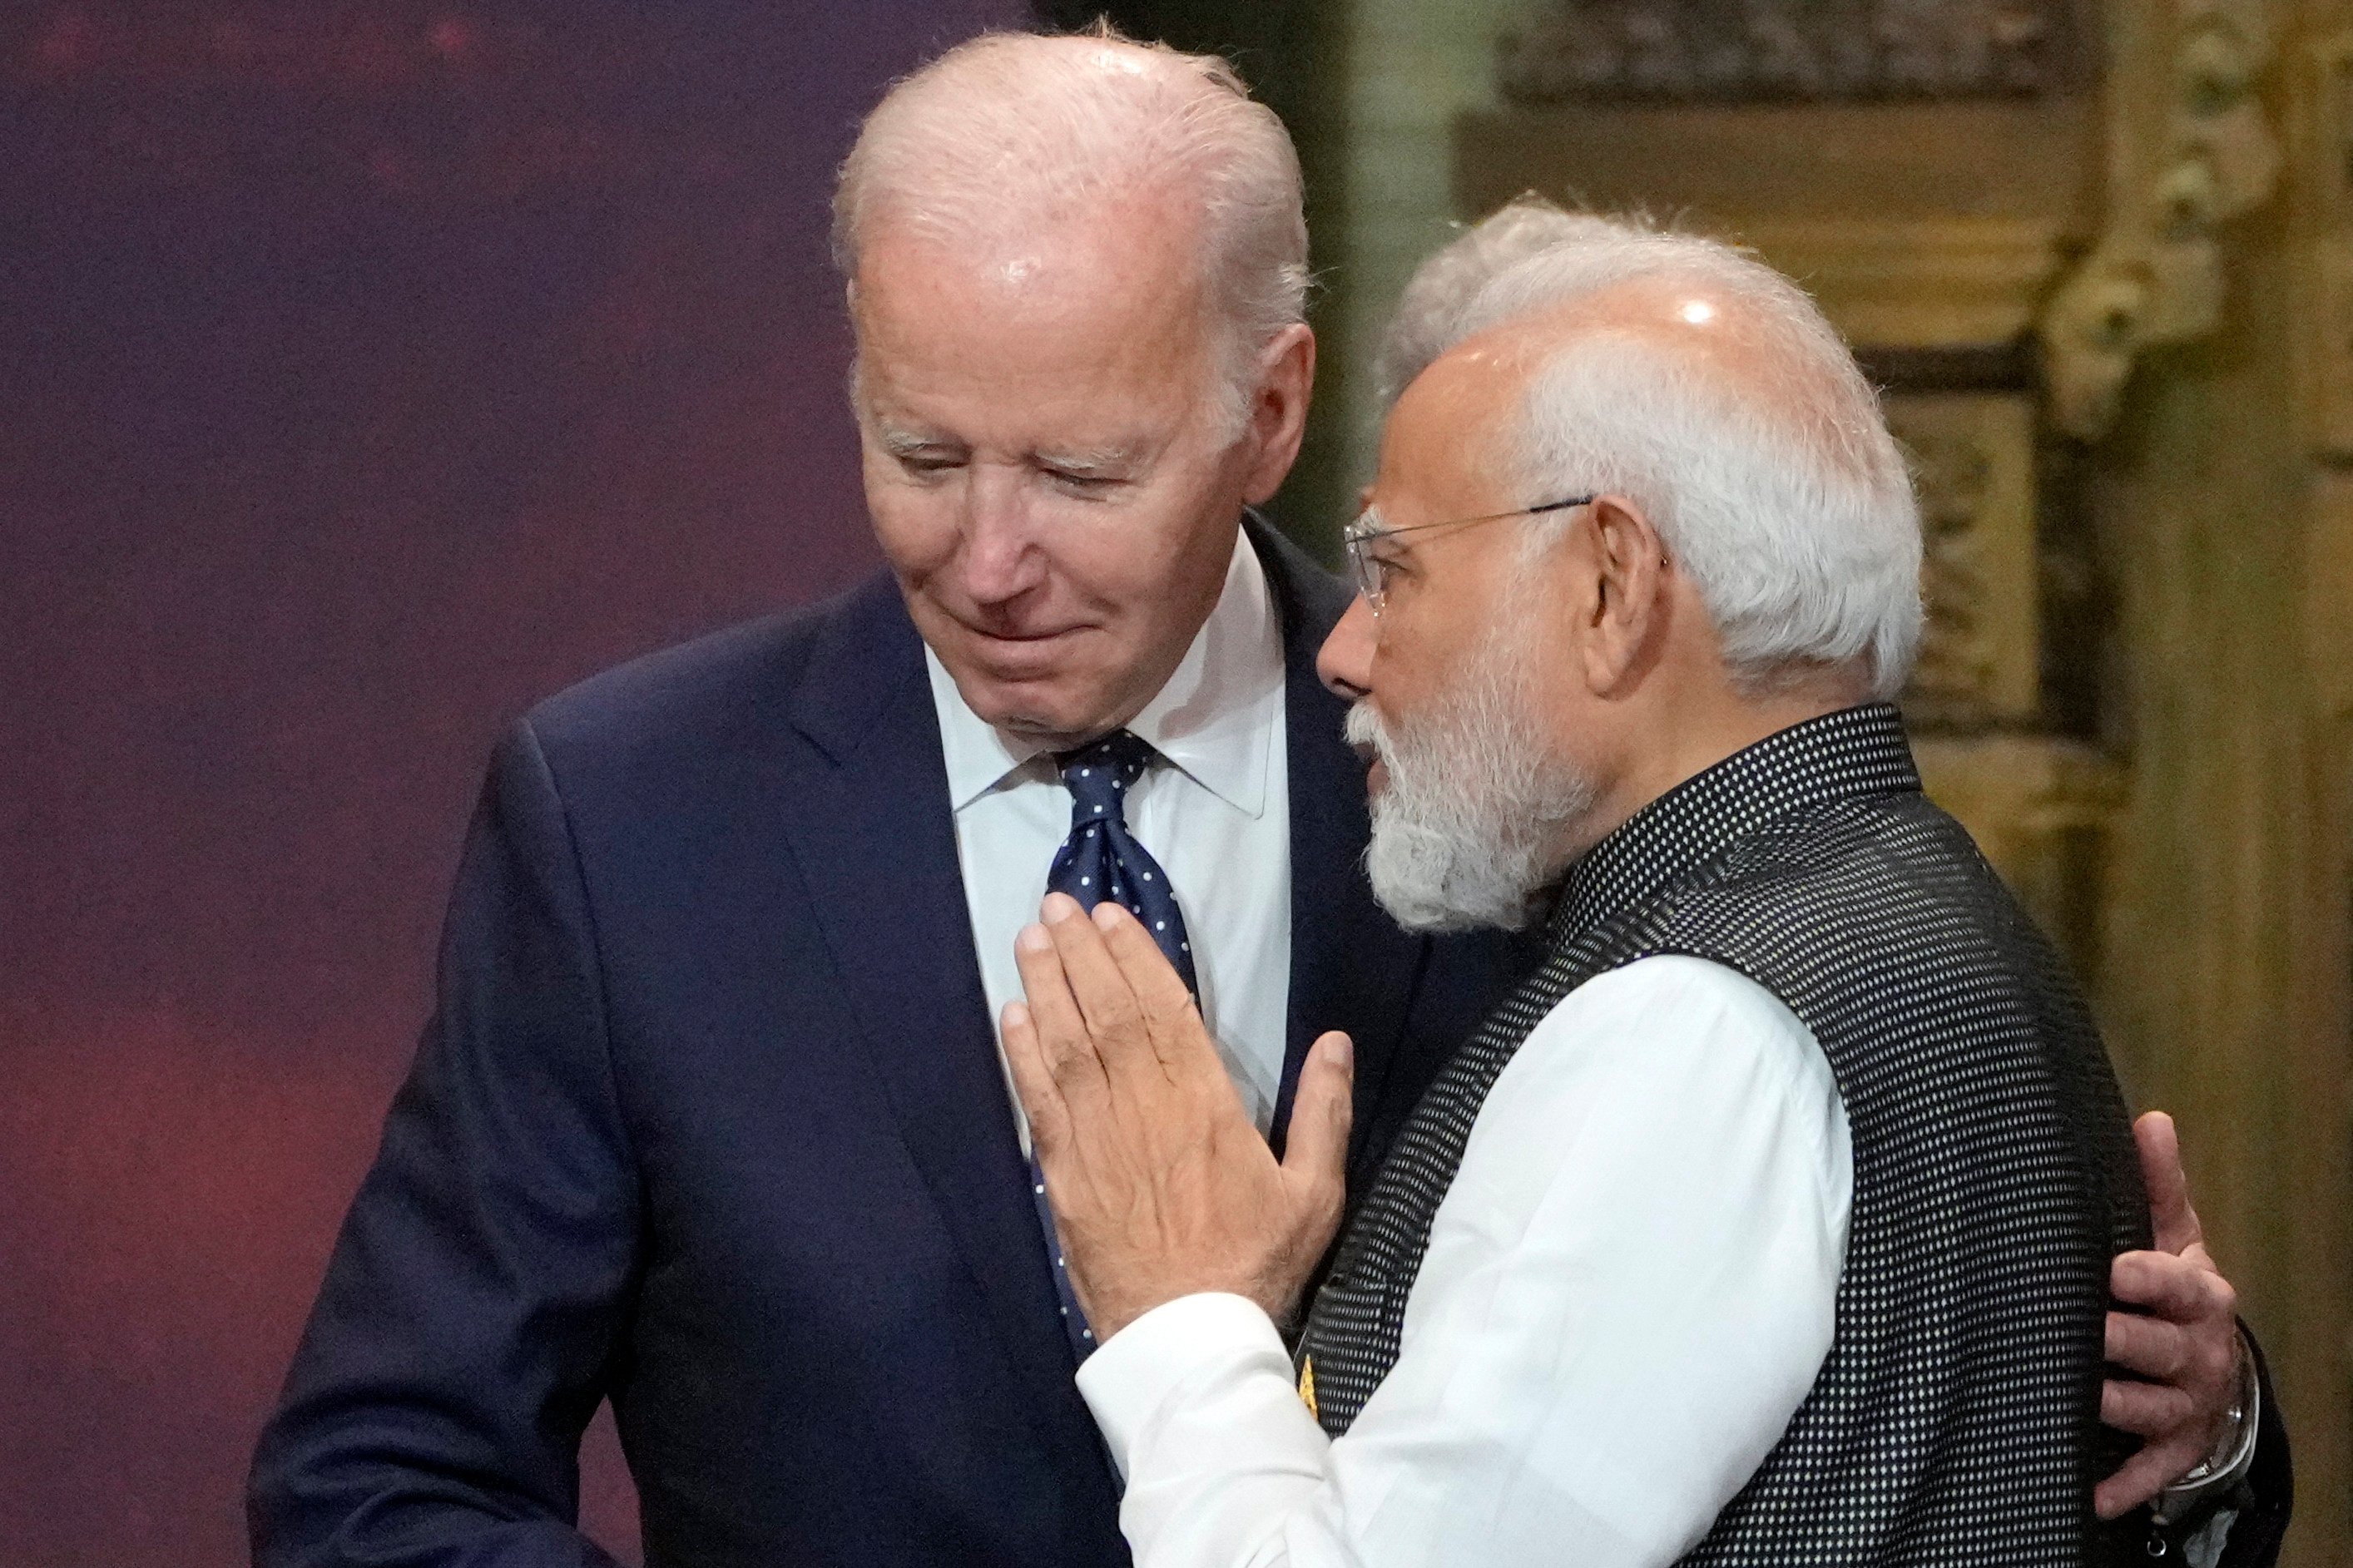 US President Joe Biden and Indian Prime Minister Narendra Modi talk during a G20 summit in Indonesia in 2022. Photo: AP